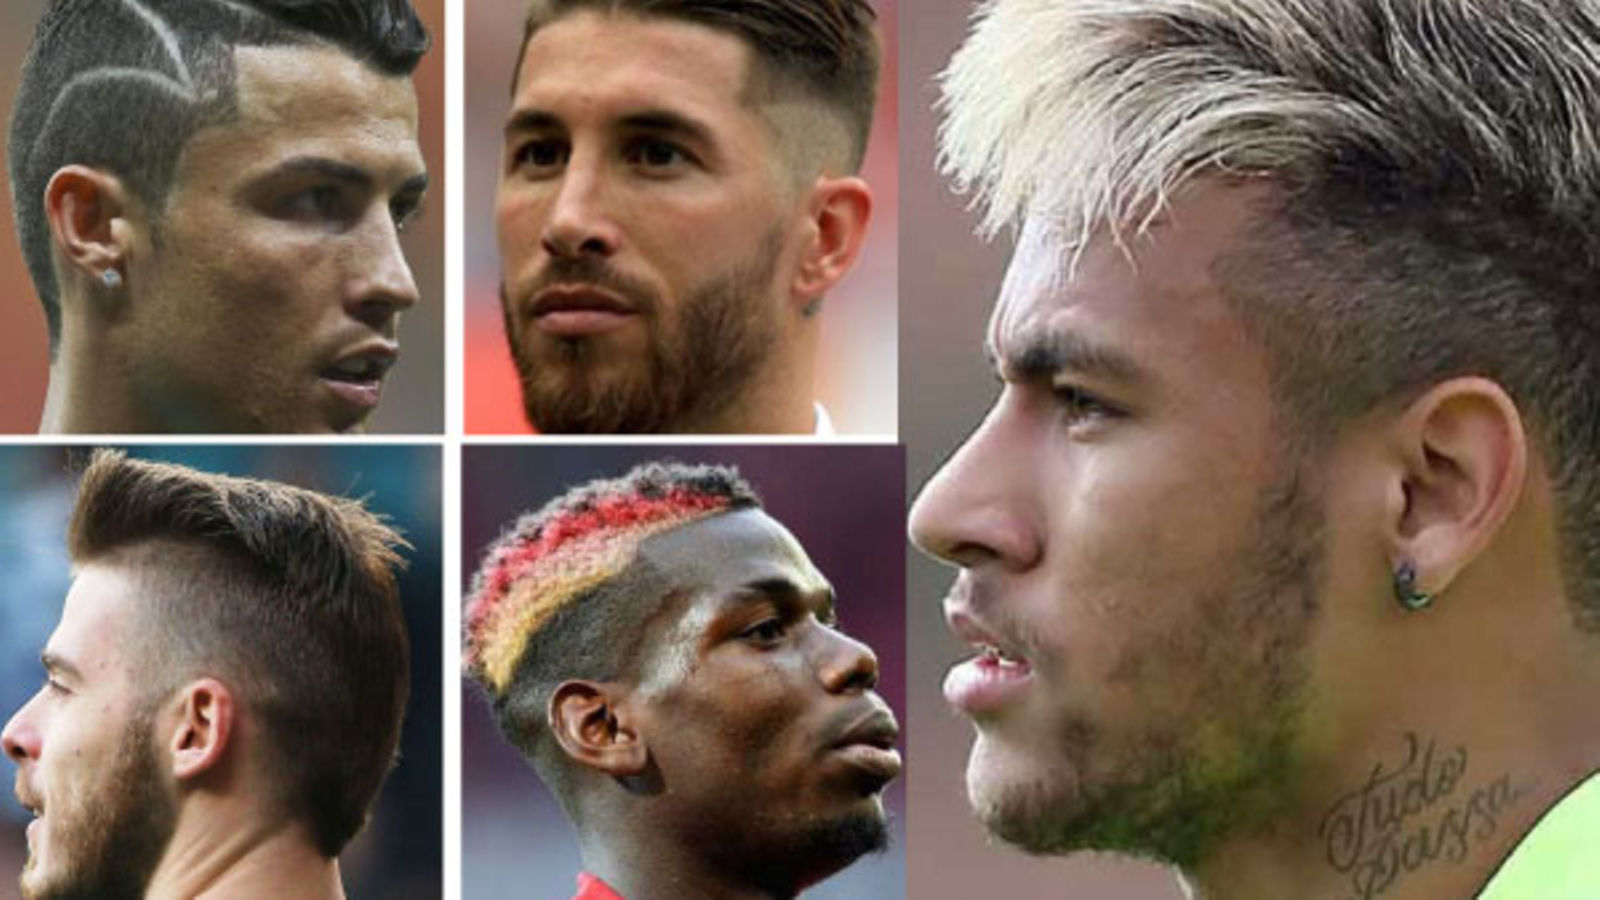 FIFA World Cup: The craziest hairstyles of the World Cup: Neymar, Pogba,  Mane... - Foto 1 de 17 | MARCA English